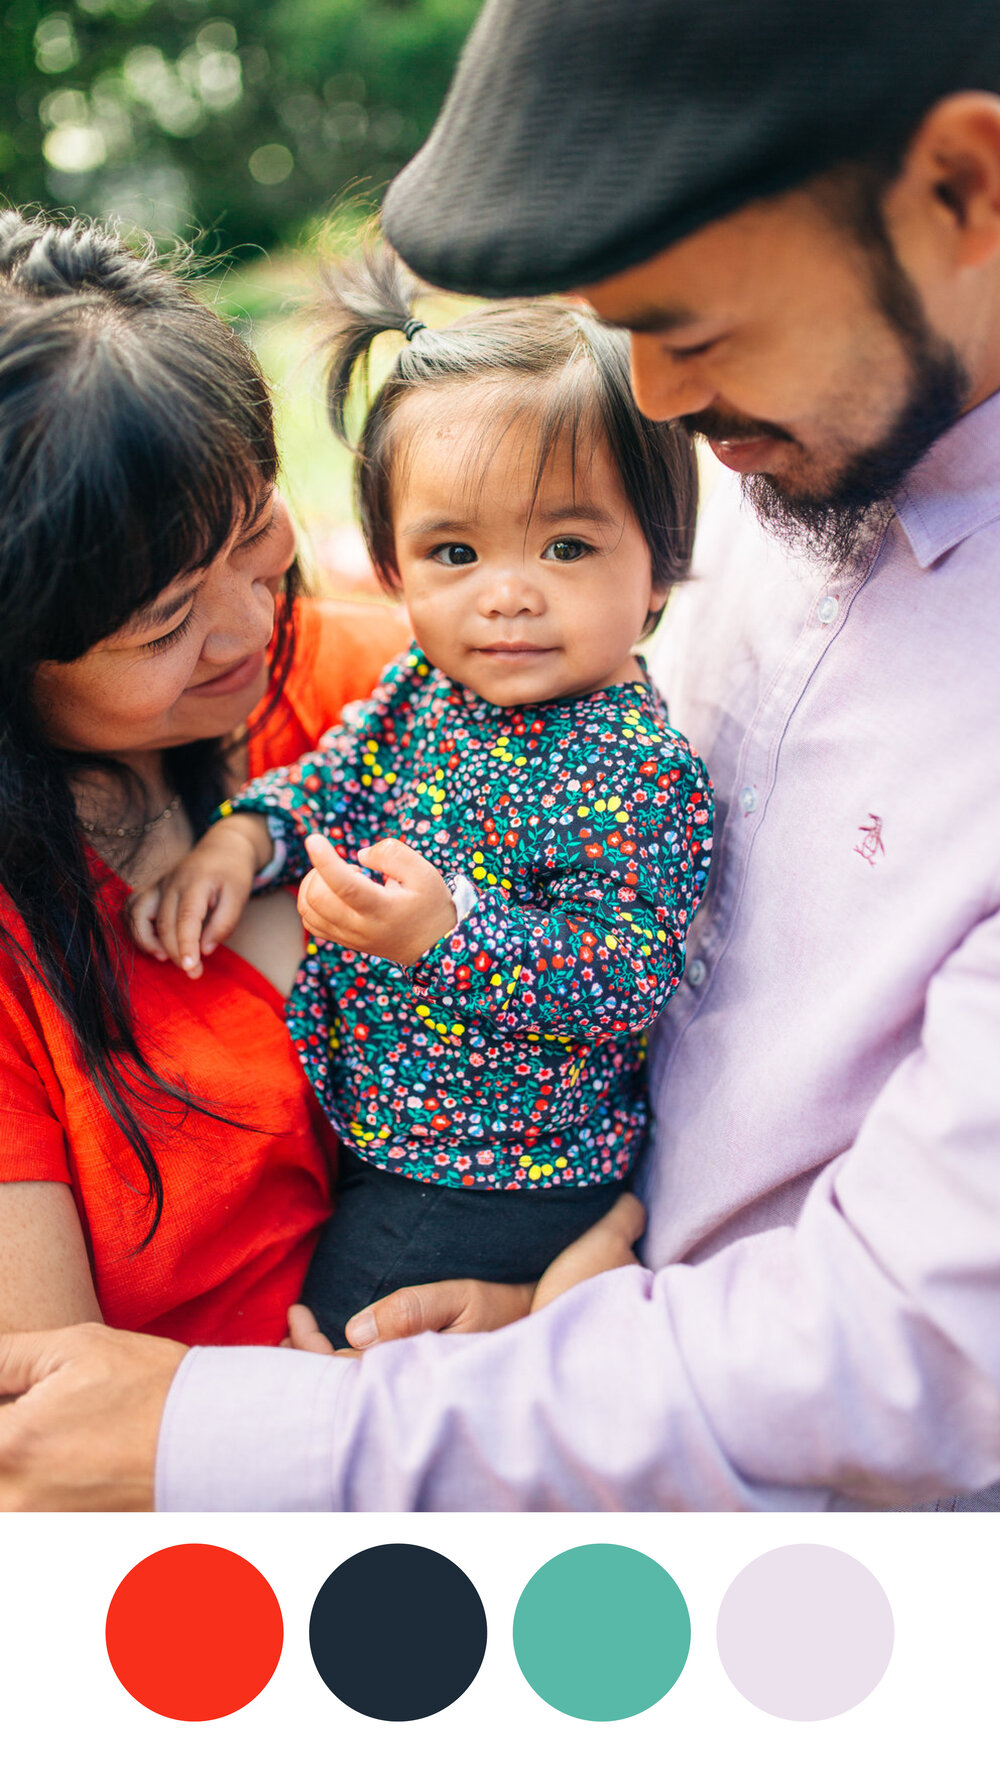 Child in vibrant floral print with mom in bright orange and dad in lavender button down